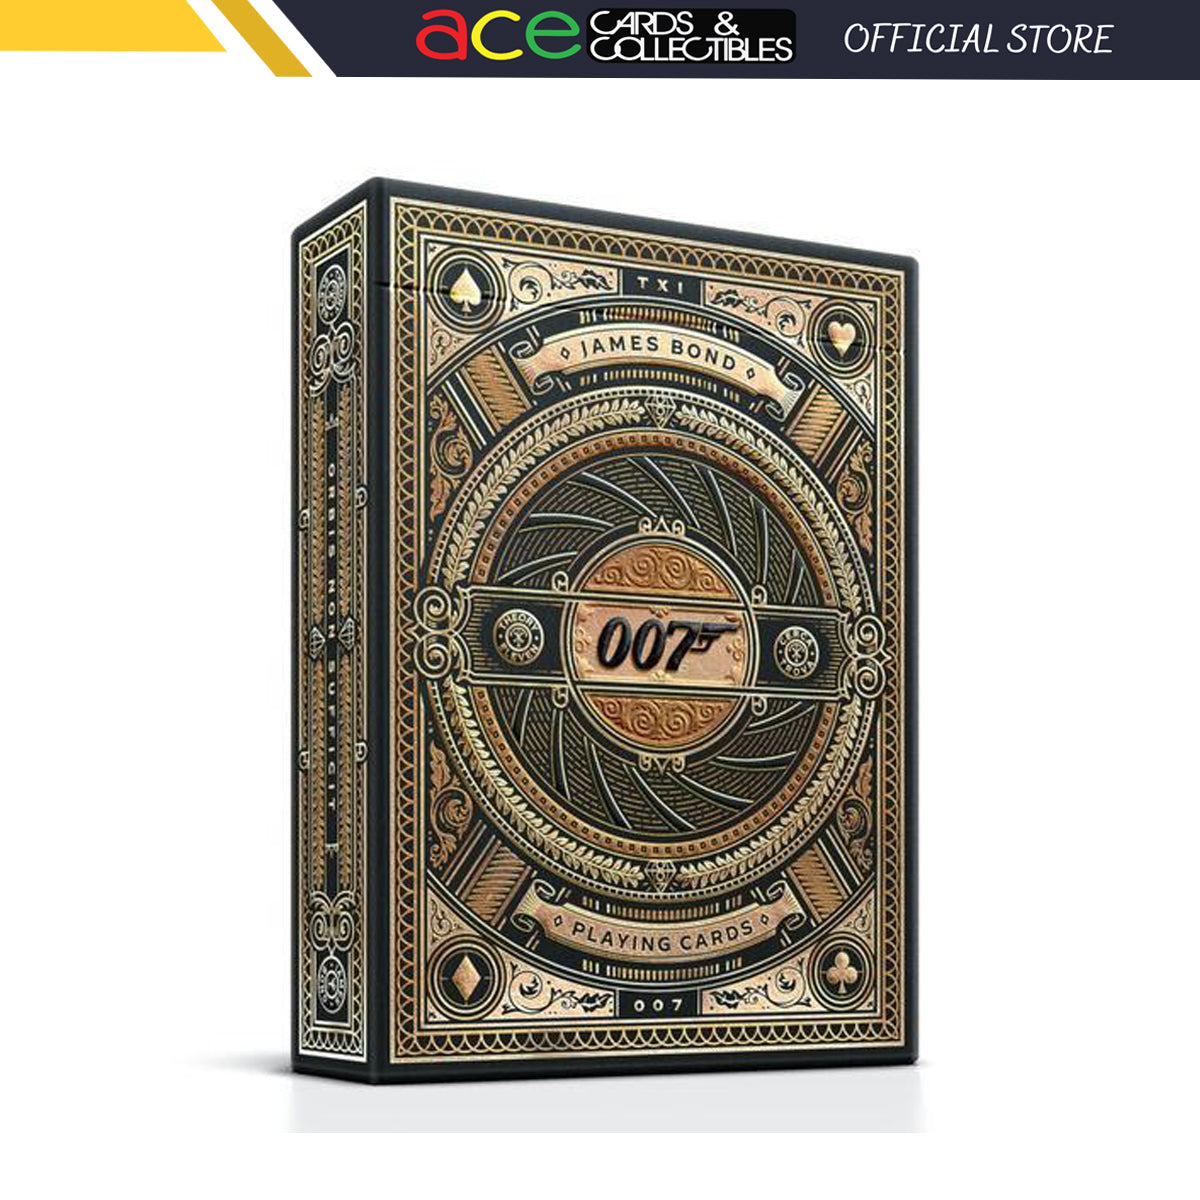 James Bond 007 Playing Cards-United States Playing Cards Company-Ace Cards &amp; Collectibles